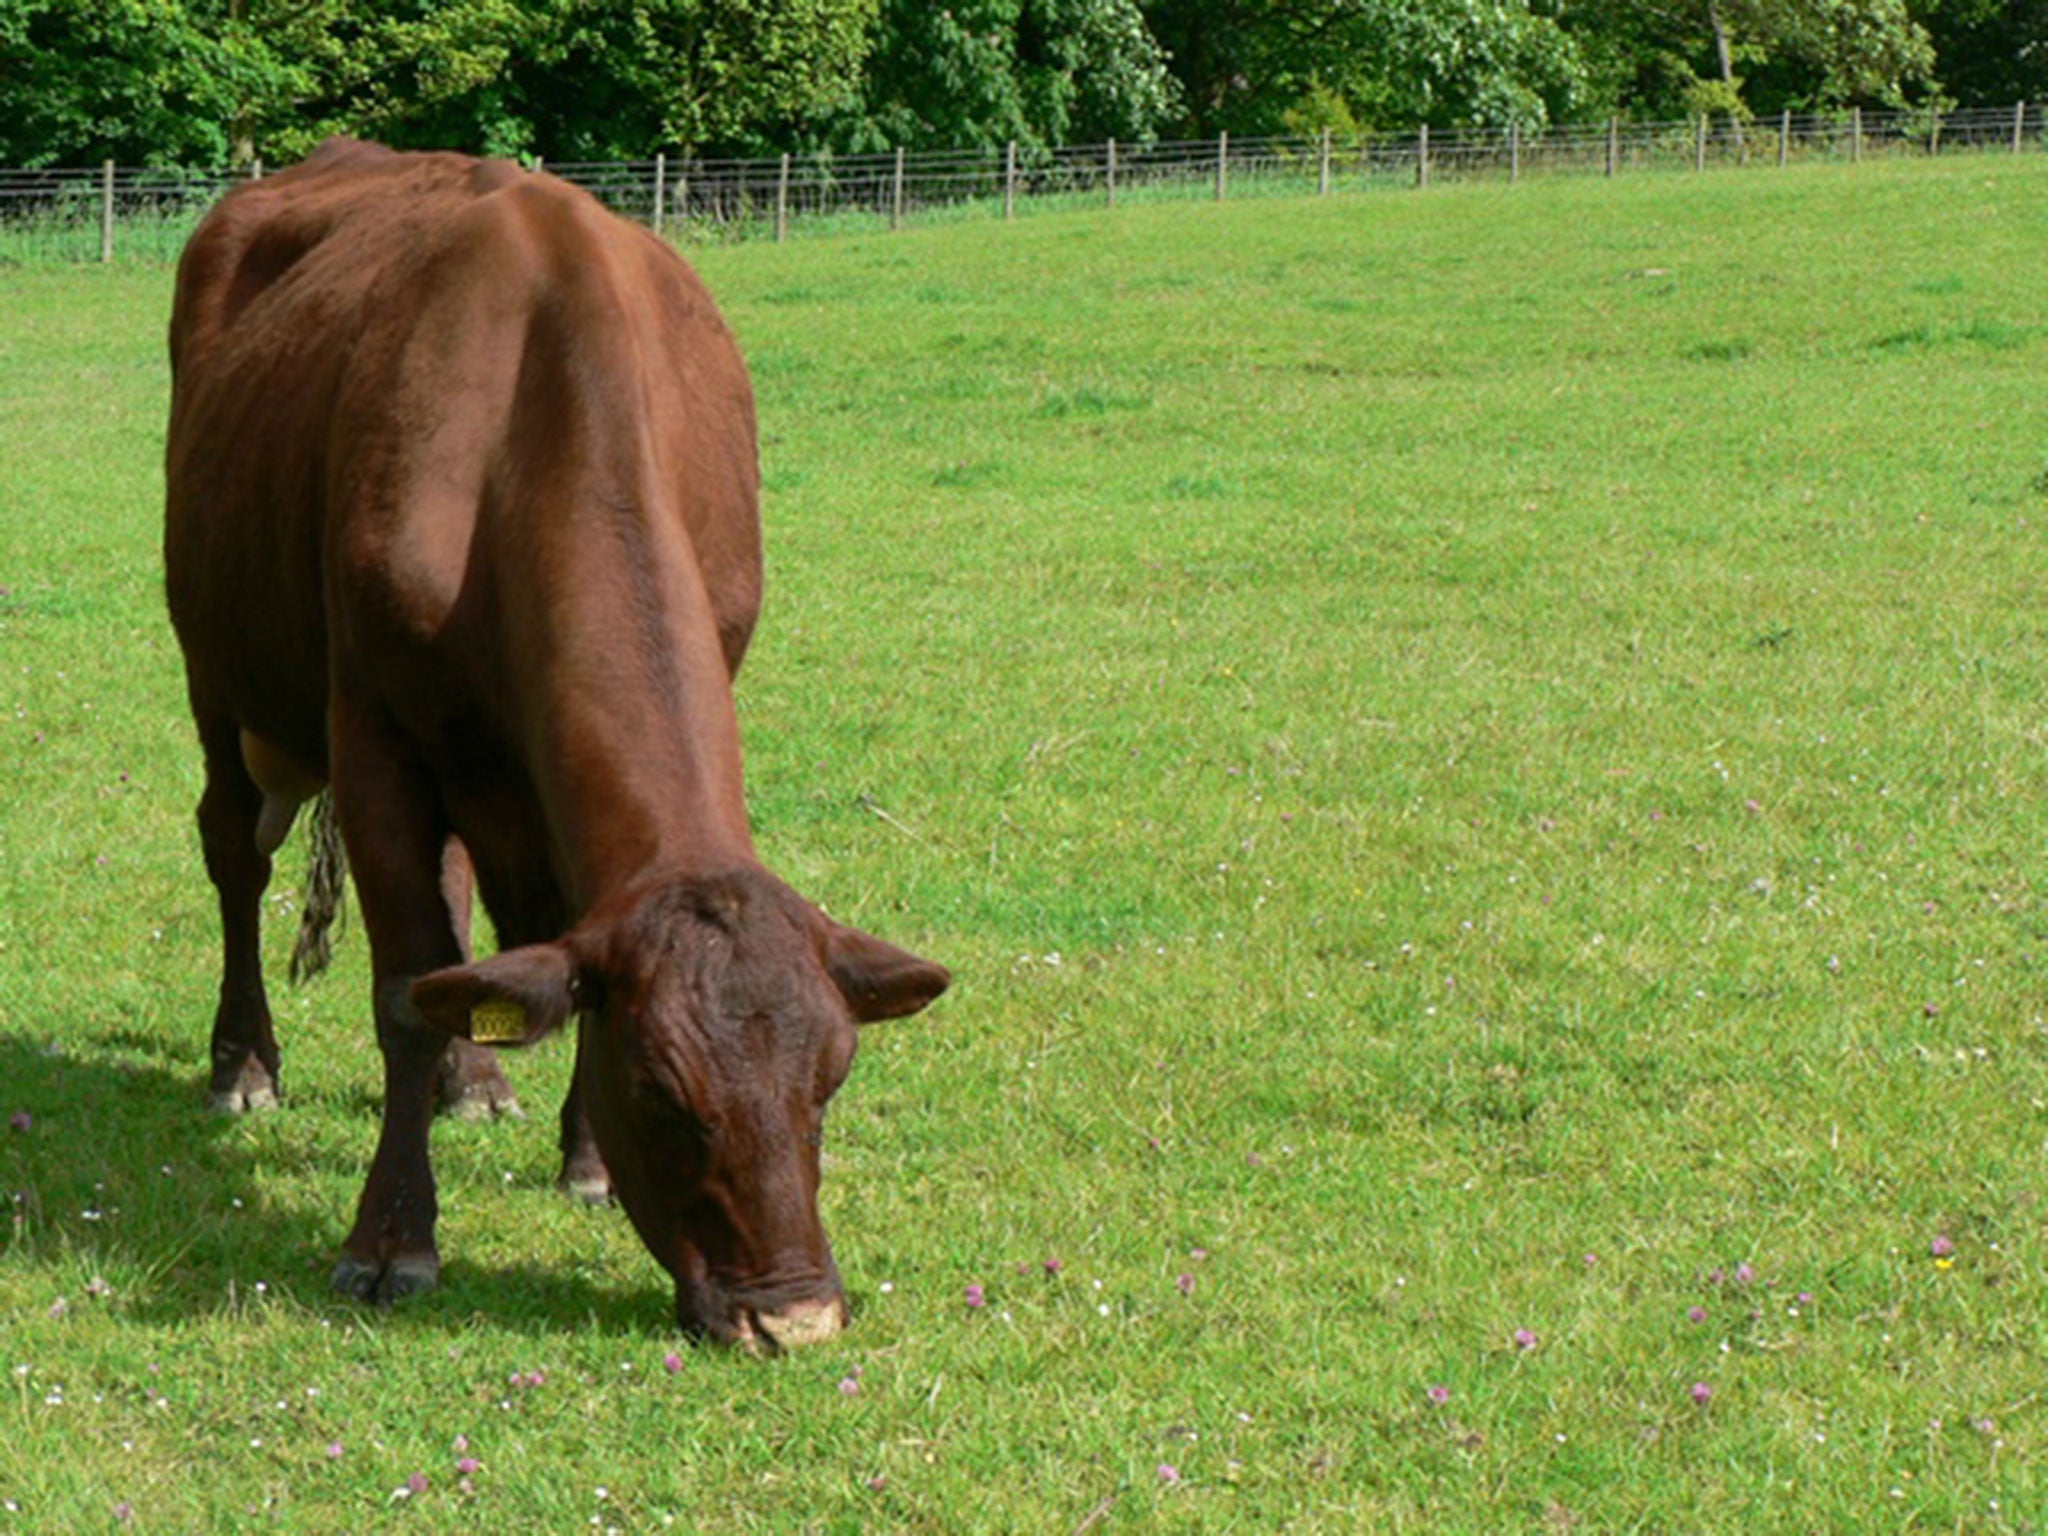 Red Poll Cattle are known for their ability to keep grass under control